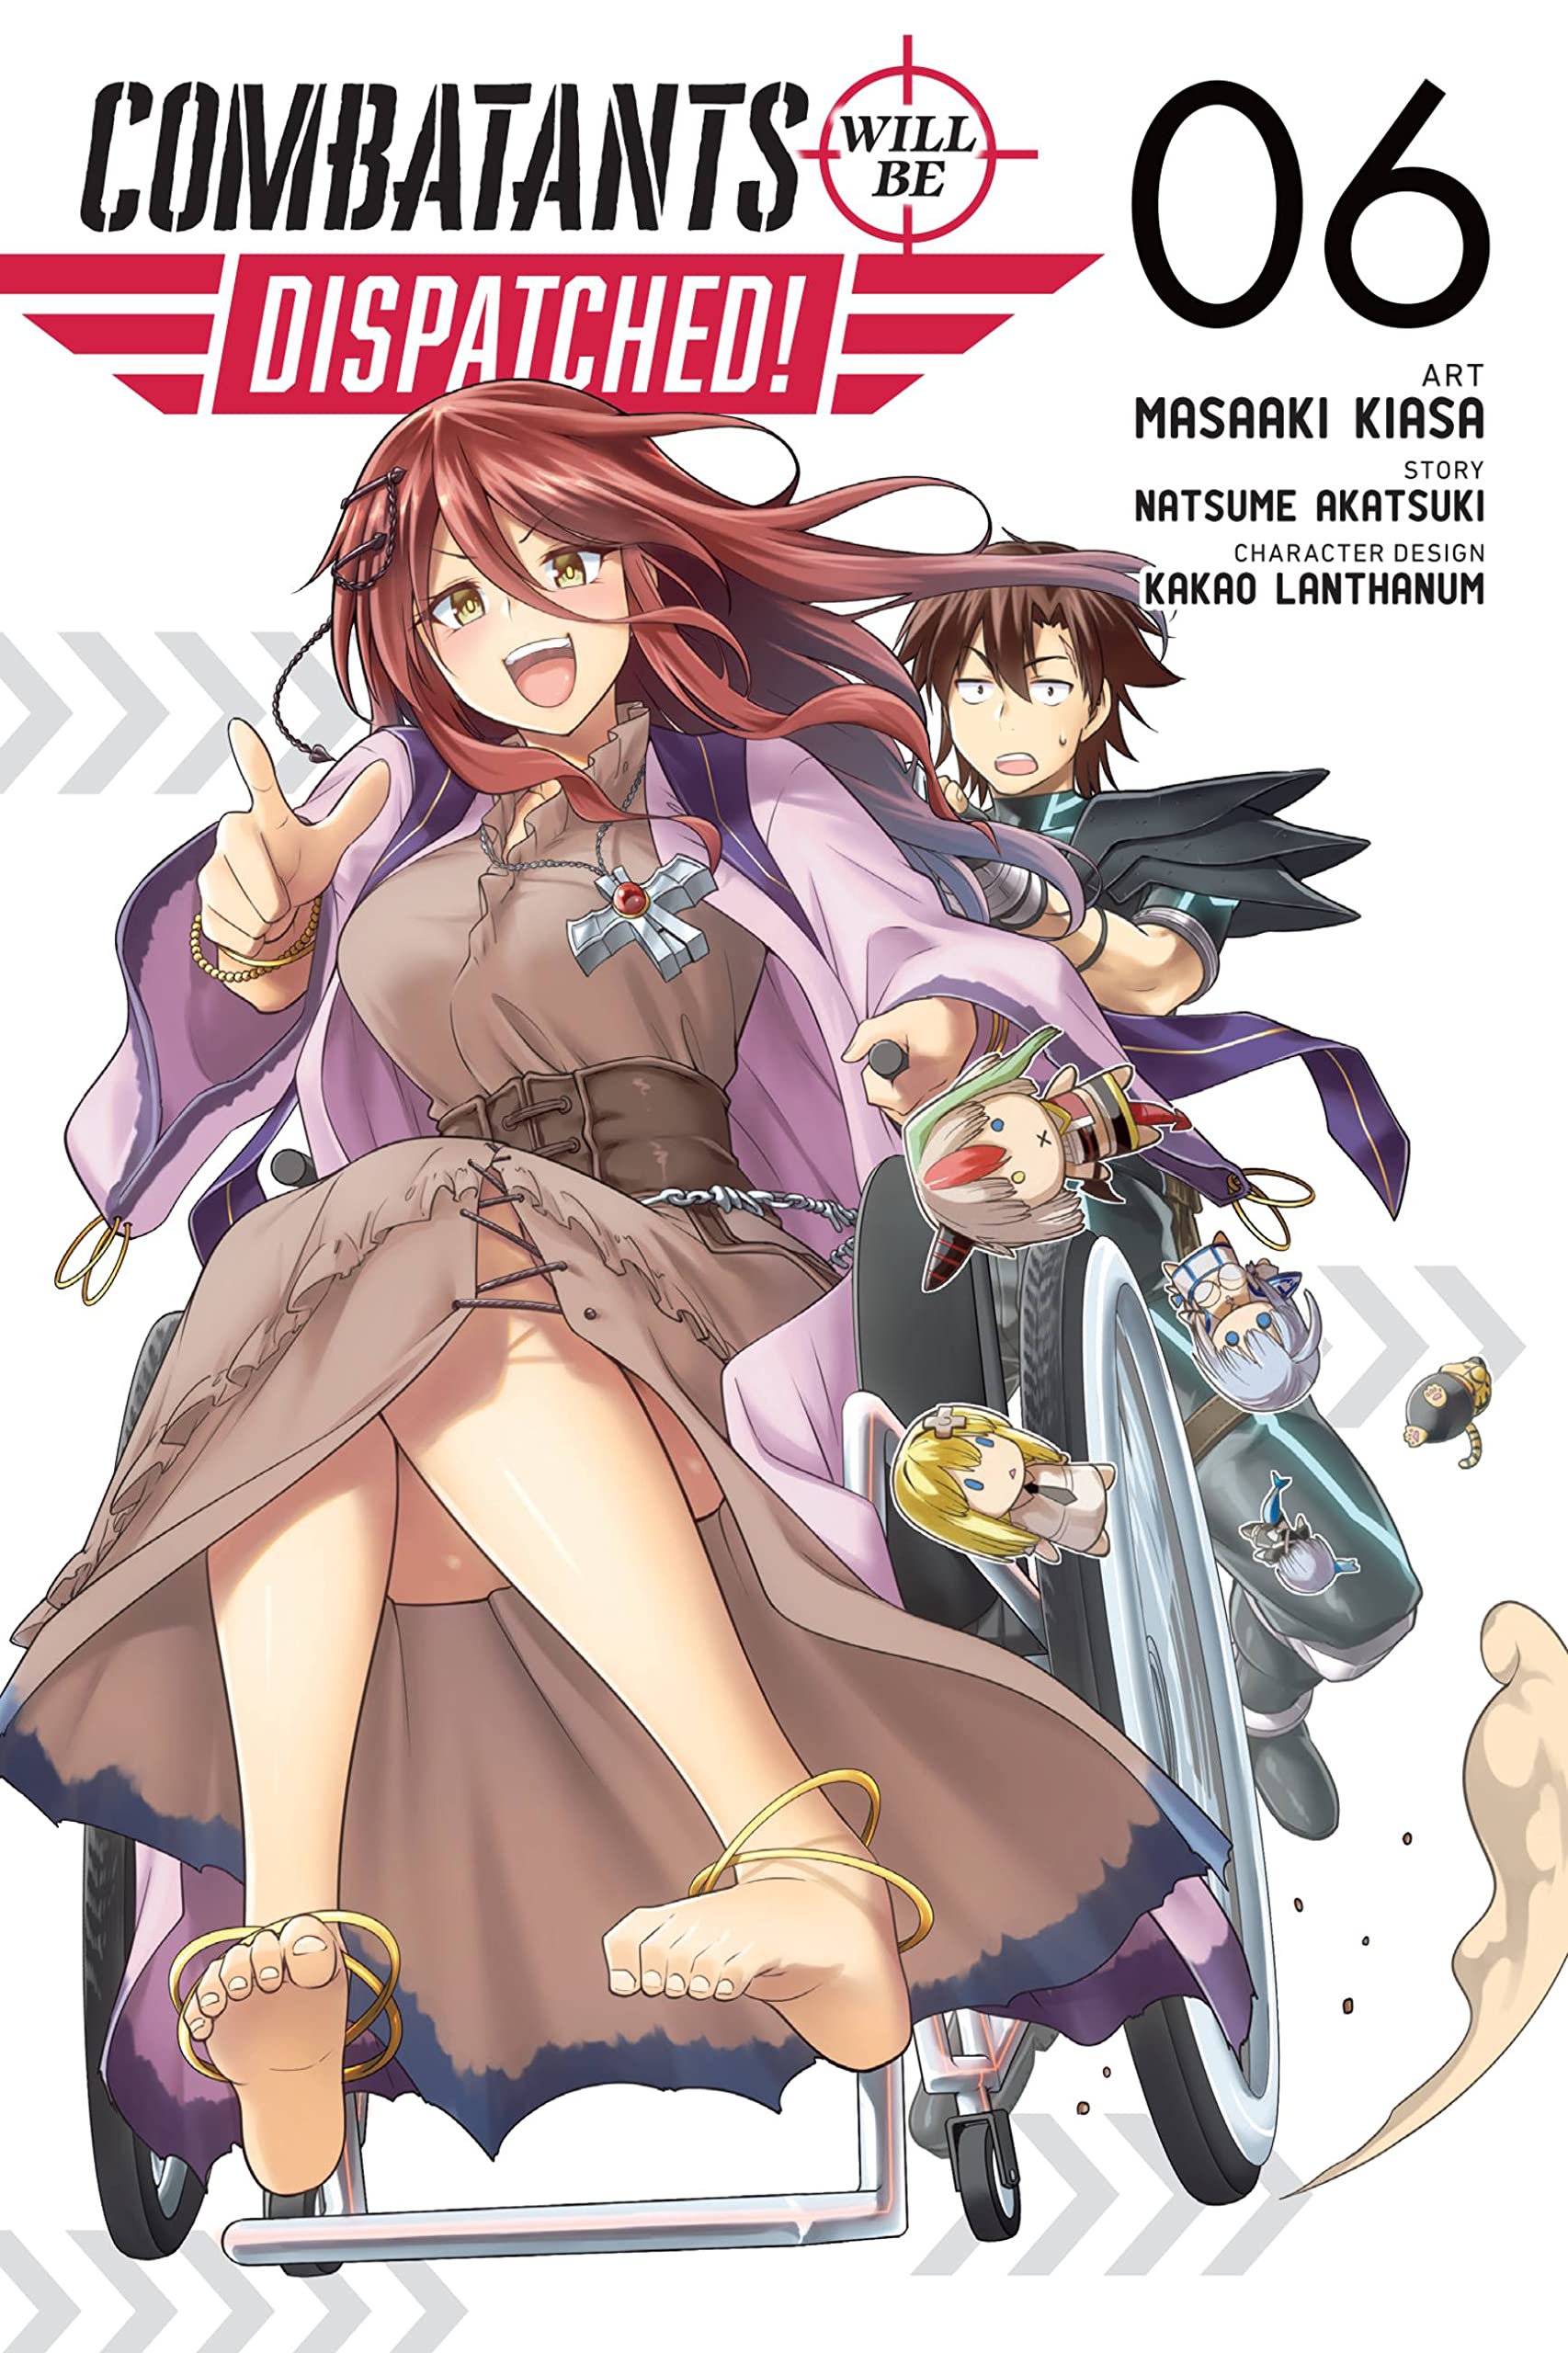 Combatants Will Be Dispatched! (Manga) Vol. 06